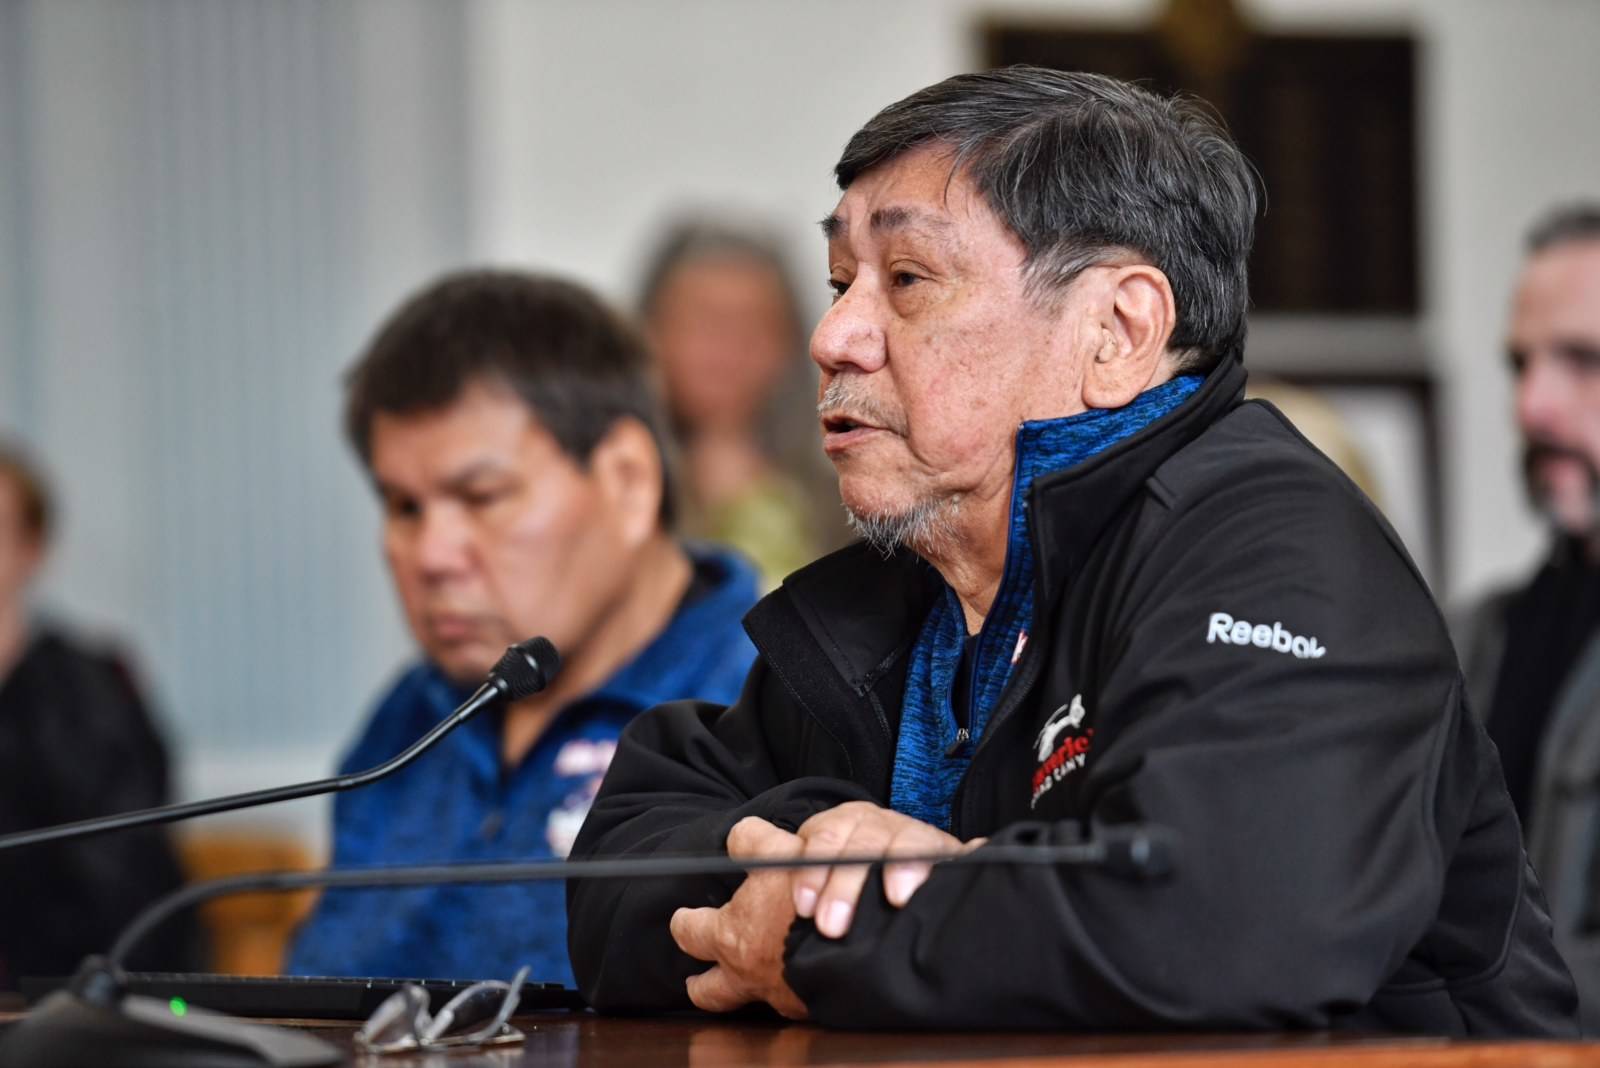 Henrich Kadake, former mayor of Kake, and his cousin Delbert Kadake, left, testify during public testimony on the state budget in the Senate Finance Committee hearing on Friday, April 12, 2019. Kadake explained how poor ferry service was hurting their community. (Michael Penn | Juneau Empire)